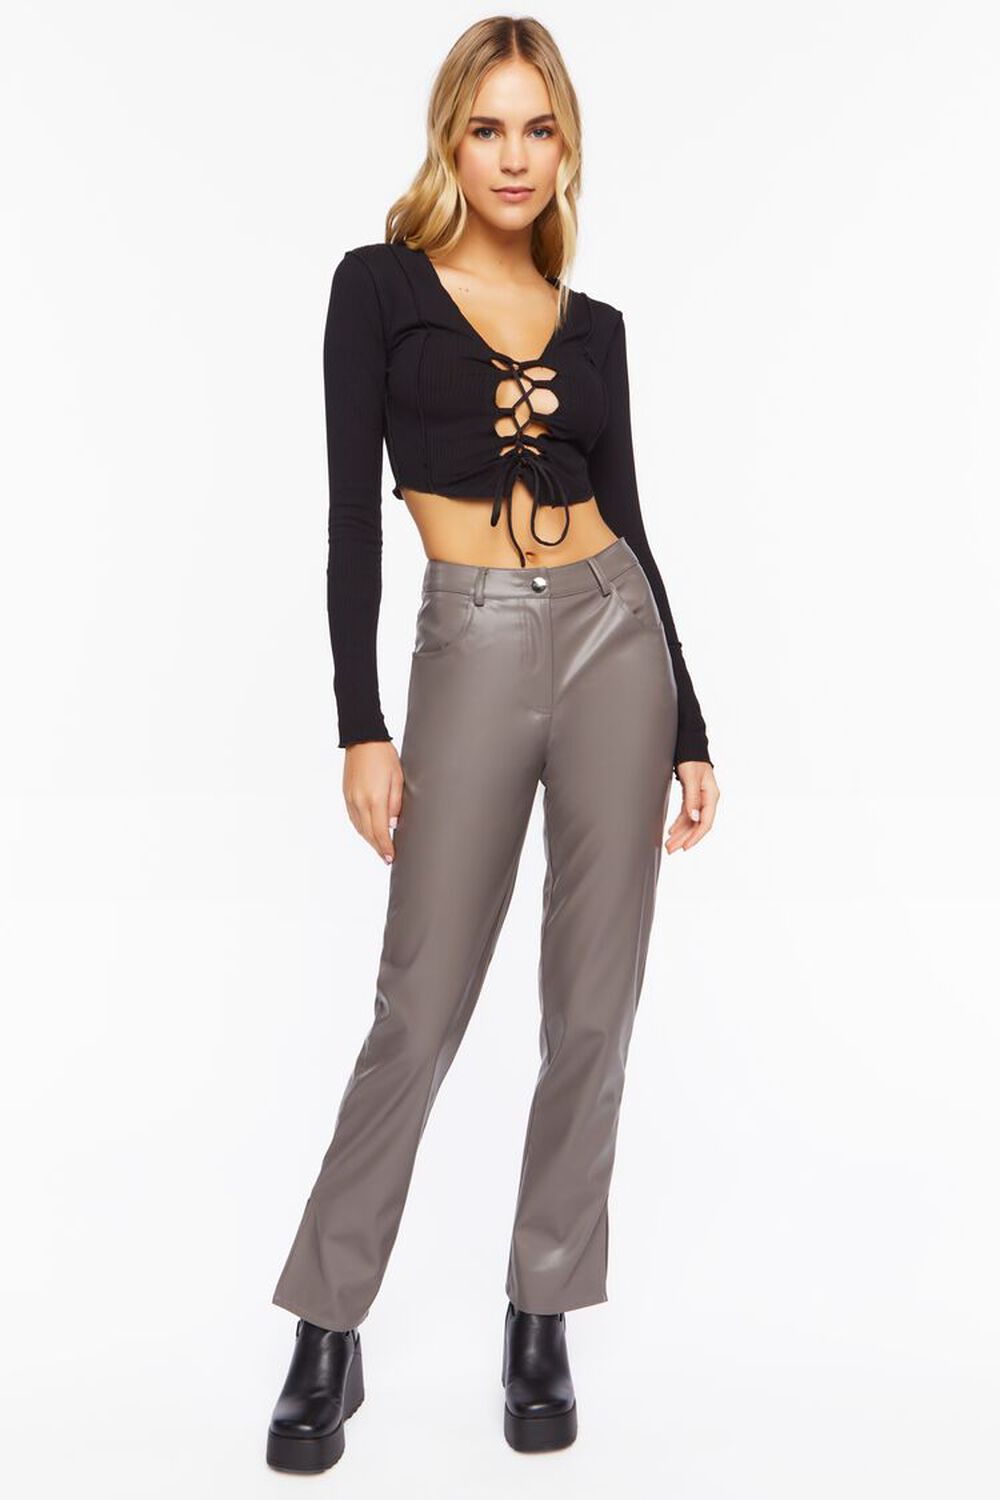 NEUTRAL GREY Faux Leather Straight-Leg Pants, image 1